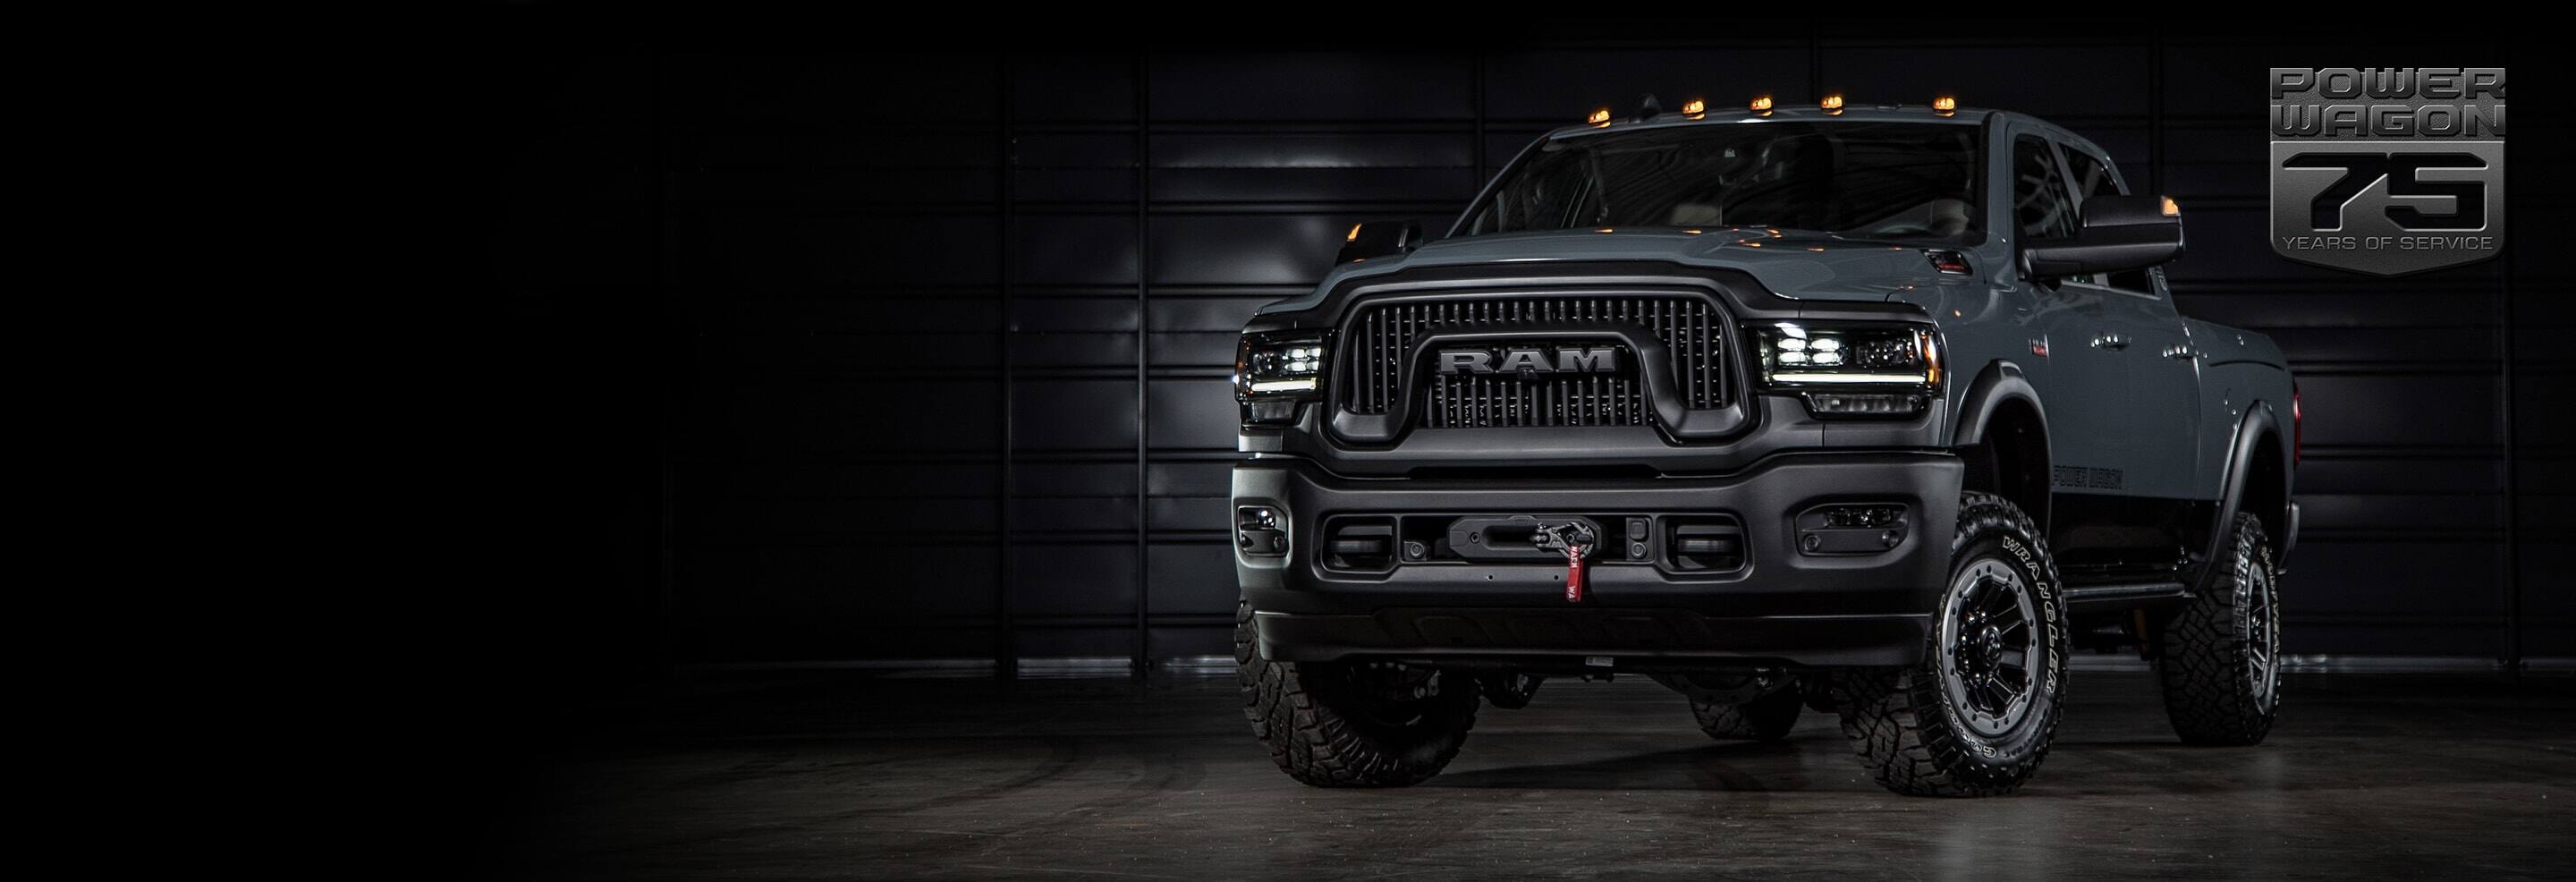 The 2021 Ram 2500 Power Wagon 75th Anniversary Edition parked in a darkened industrial garage. The Power Wagon 75 Years of Service logo.